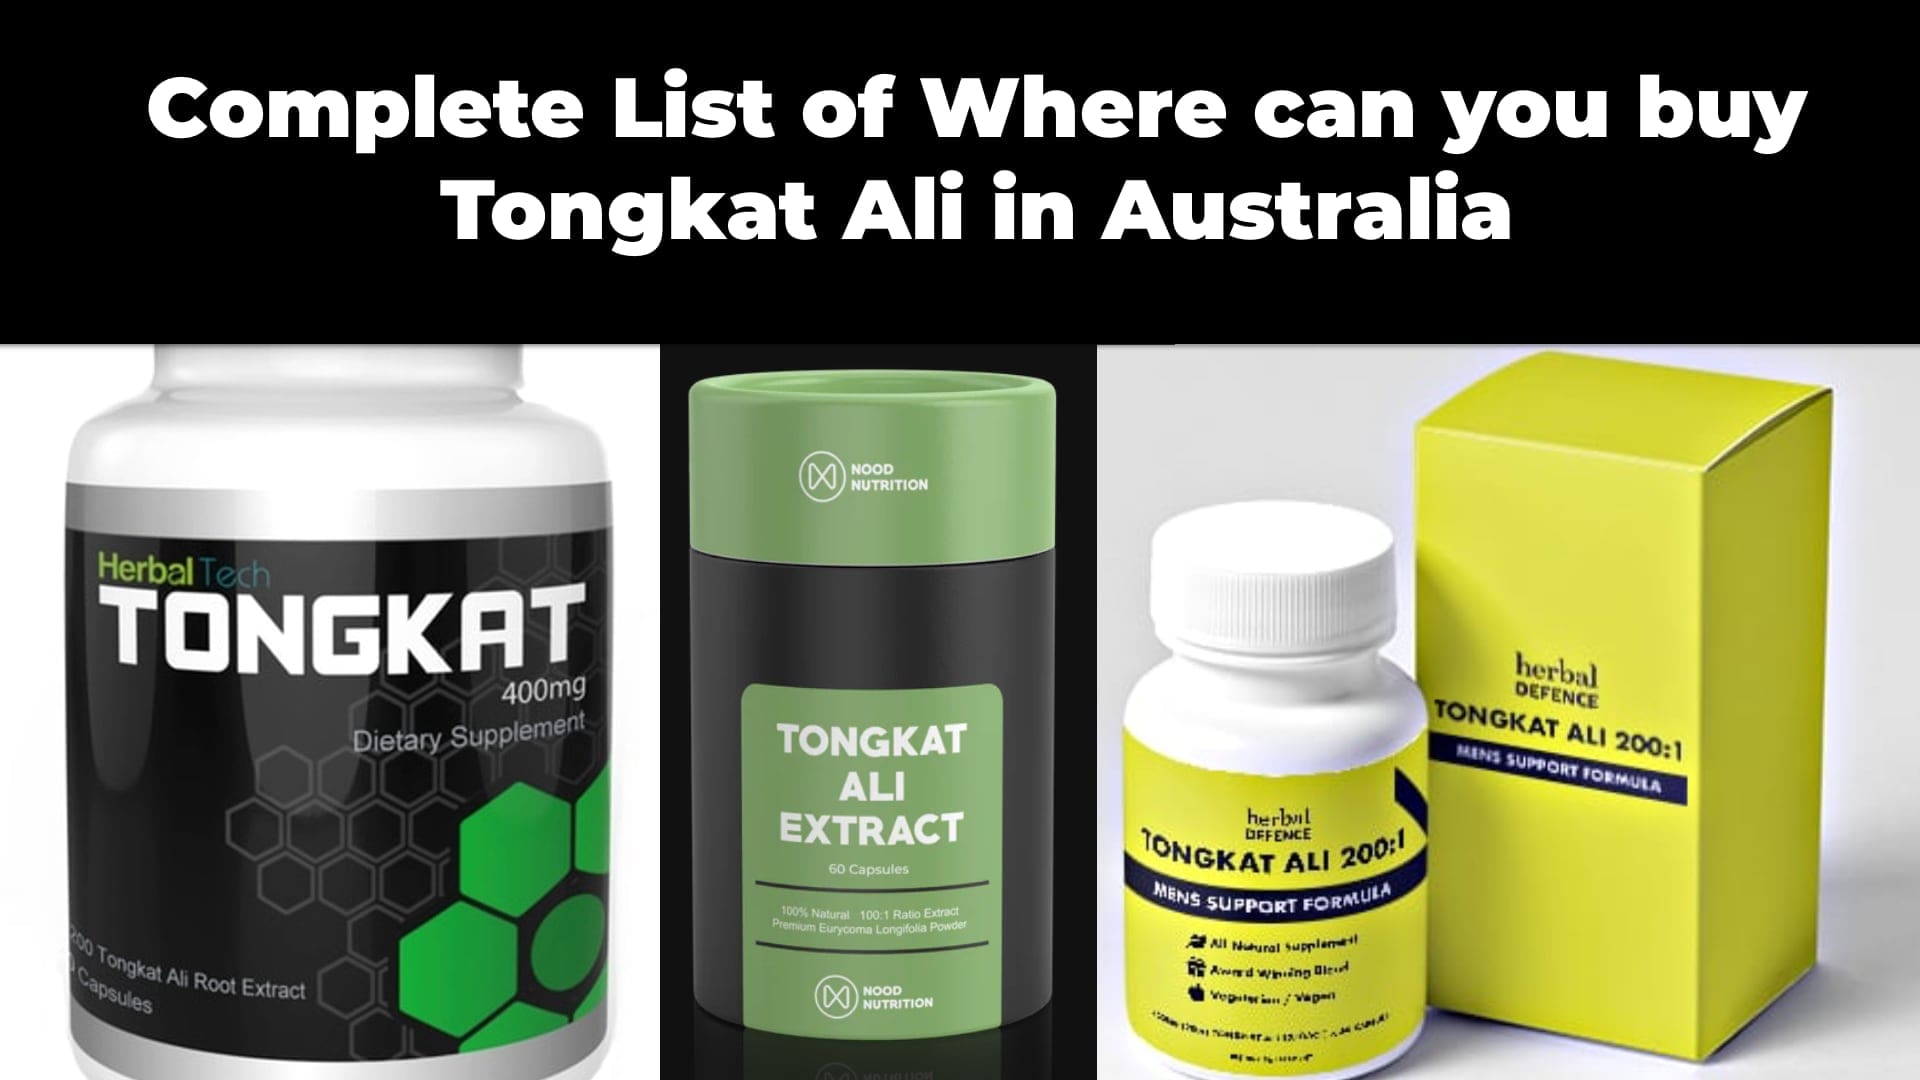 Complete List of Where can you buy Tongkat Ali in Australia